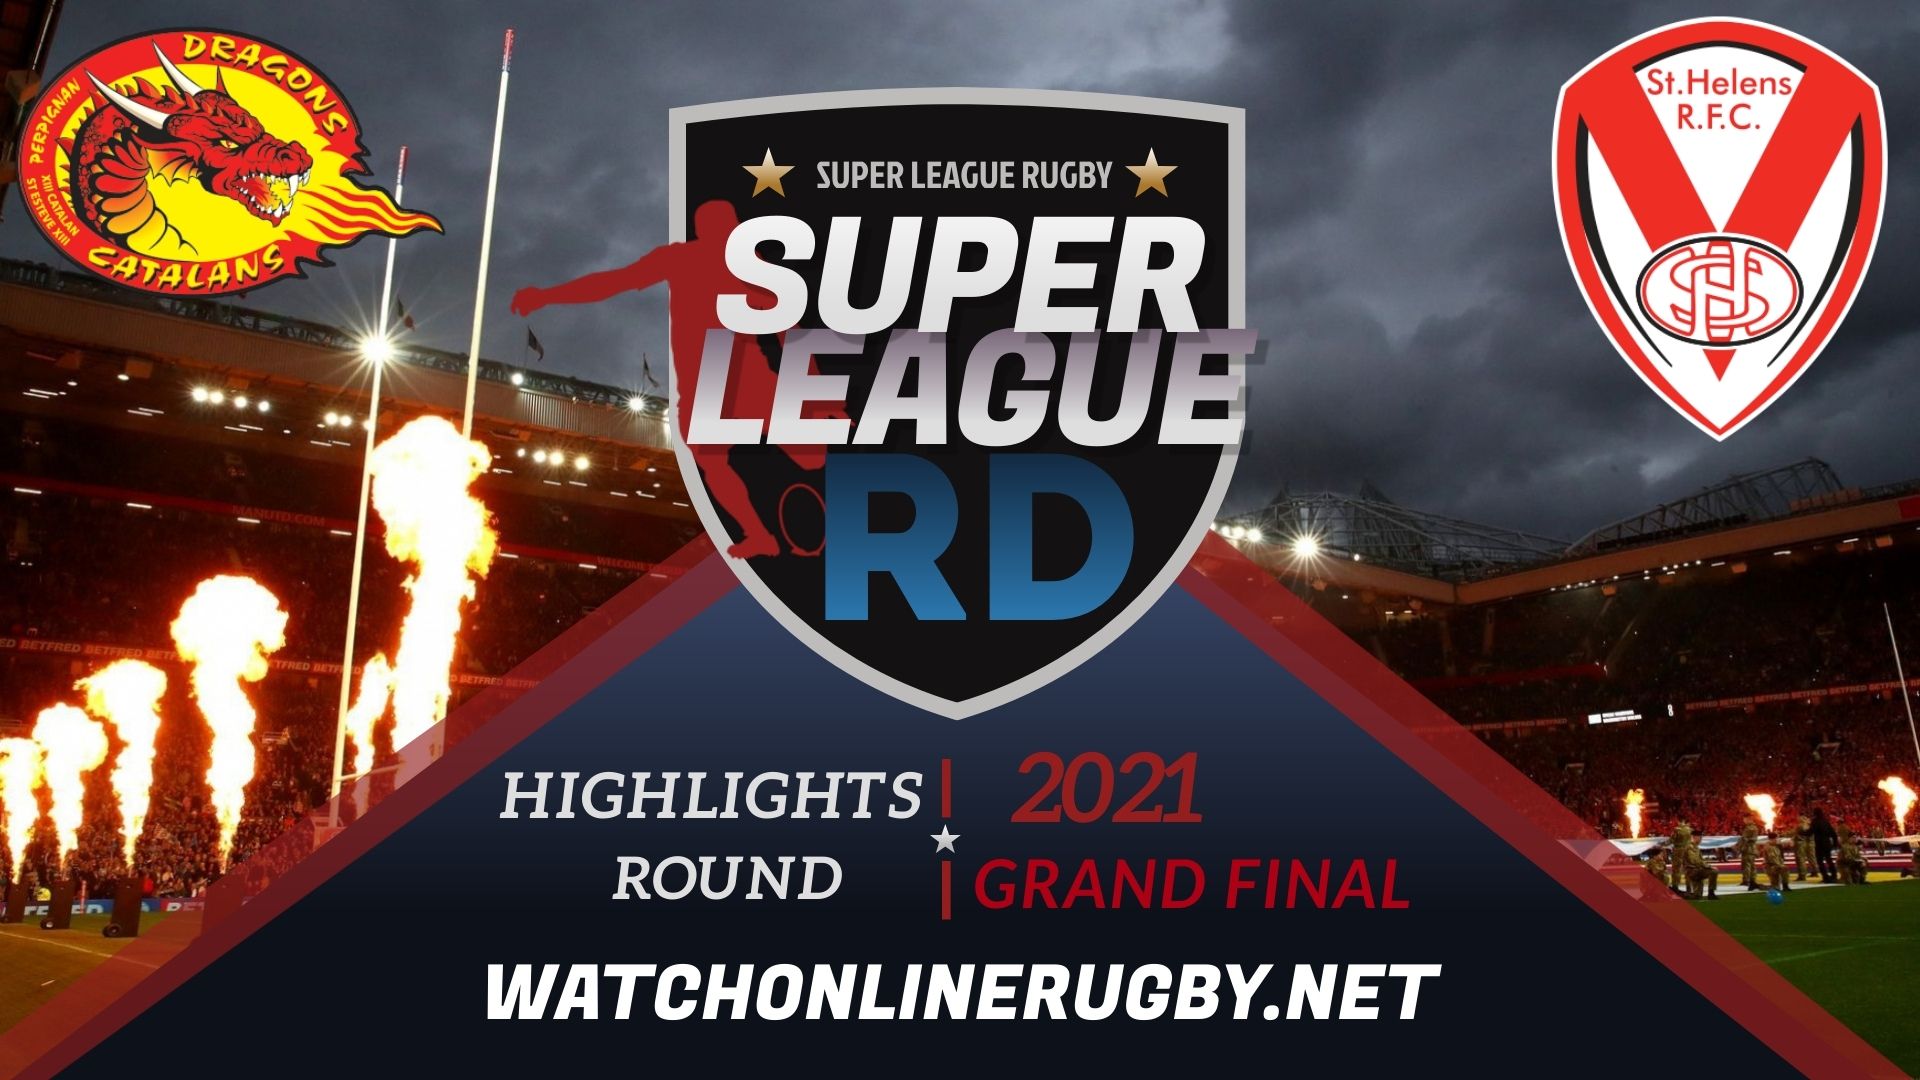 Catalans Dragons Vs St Helens Super League Rugby 2021 Grand Final